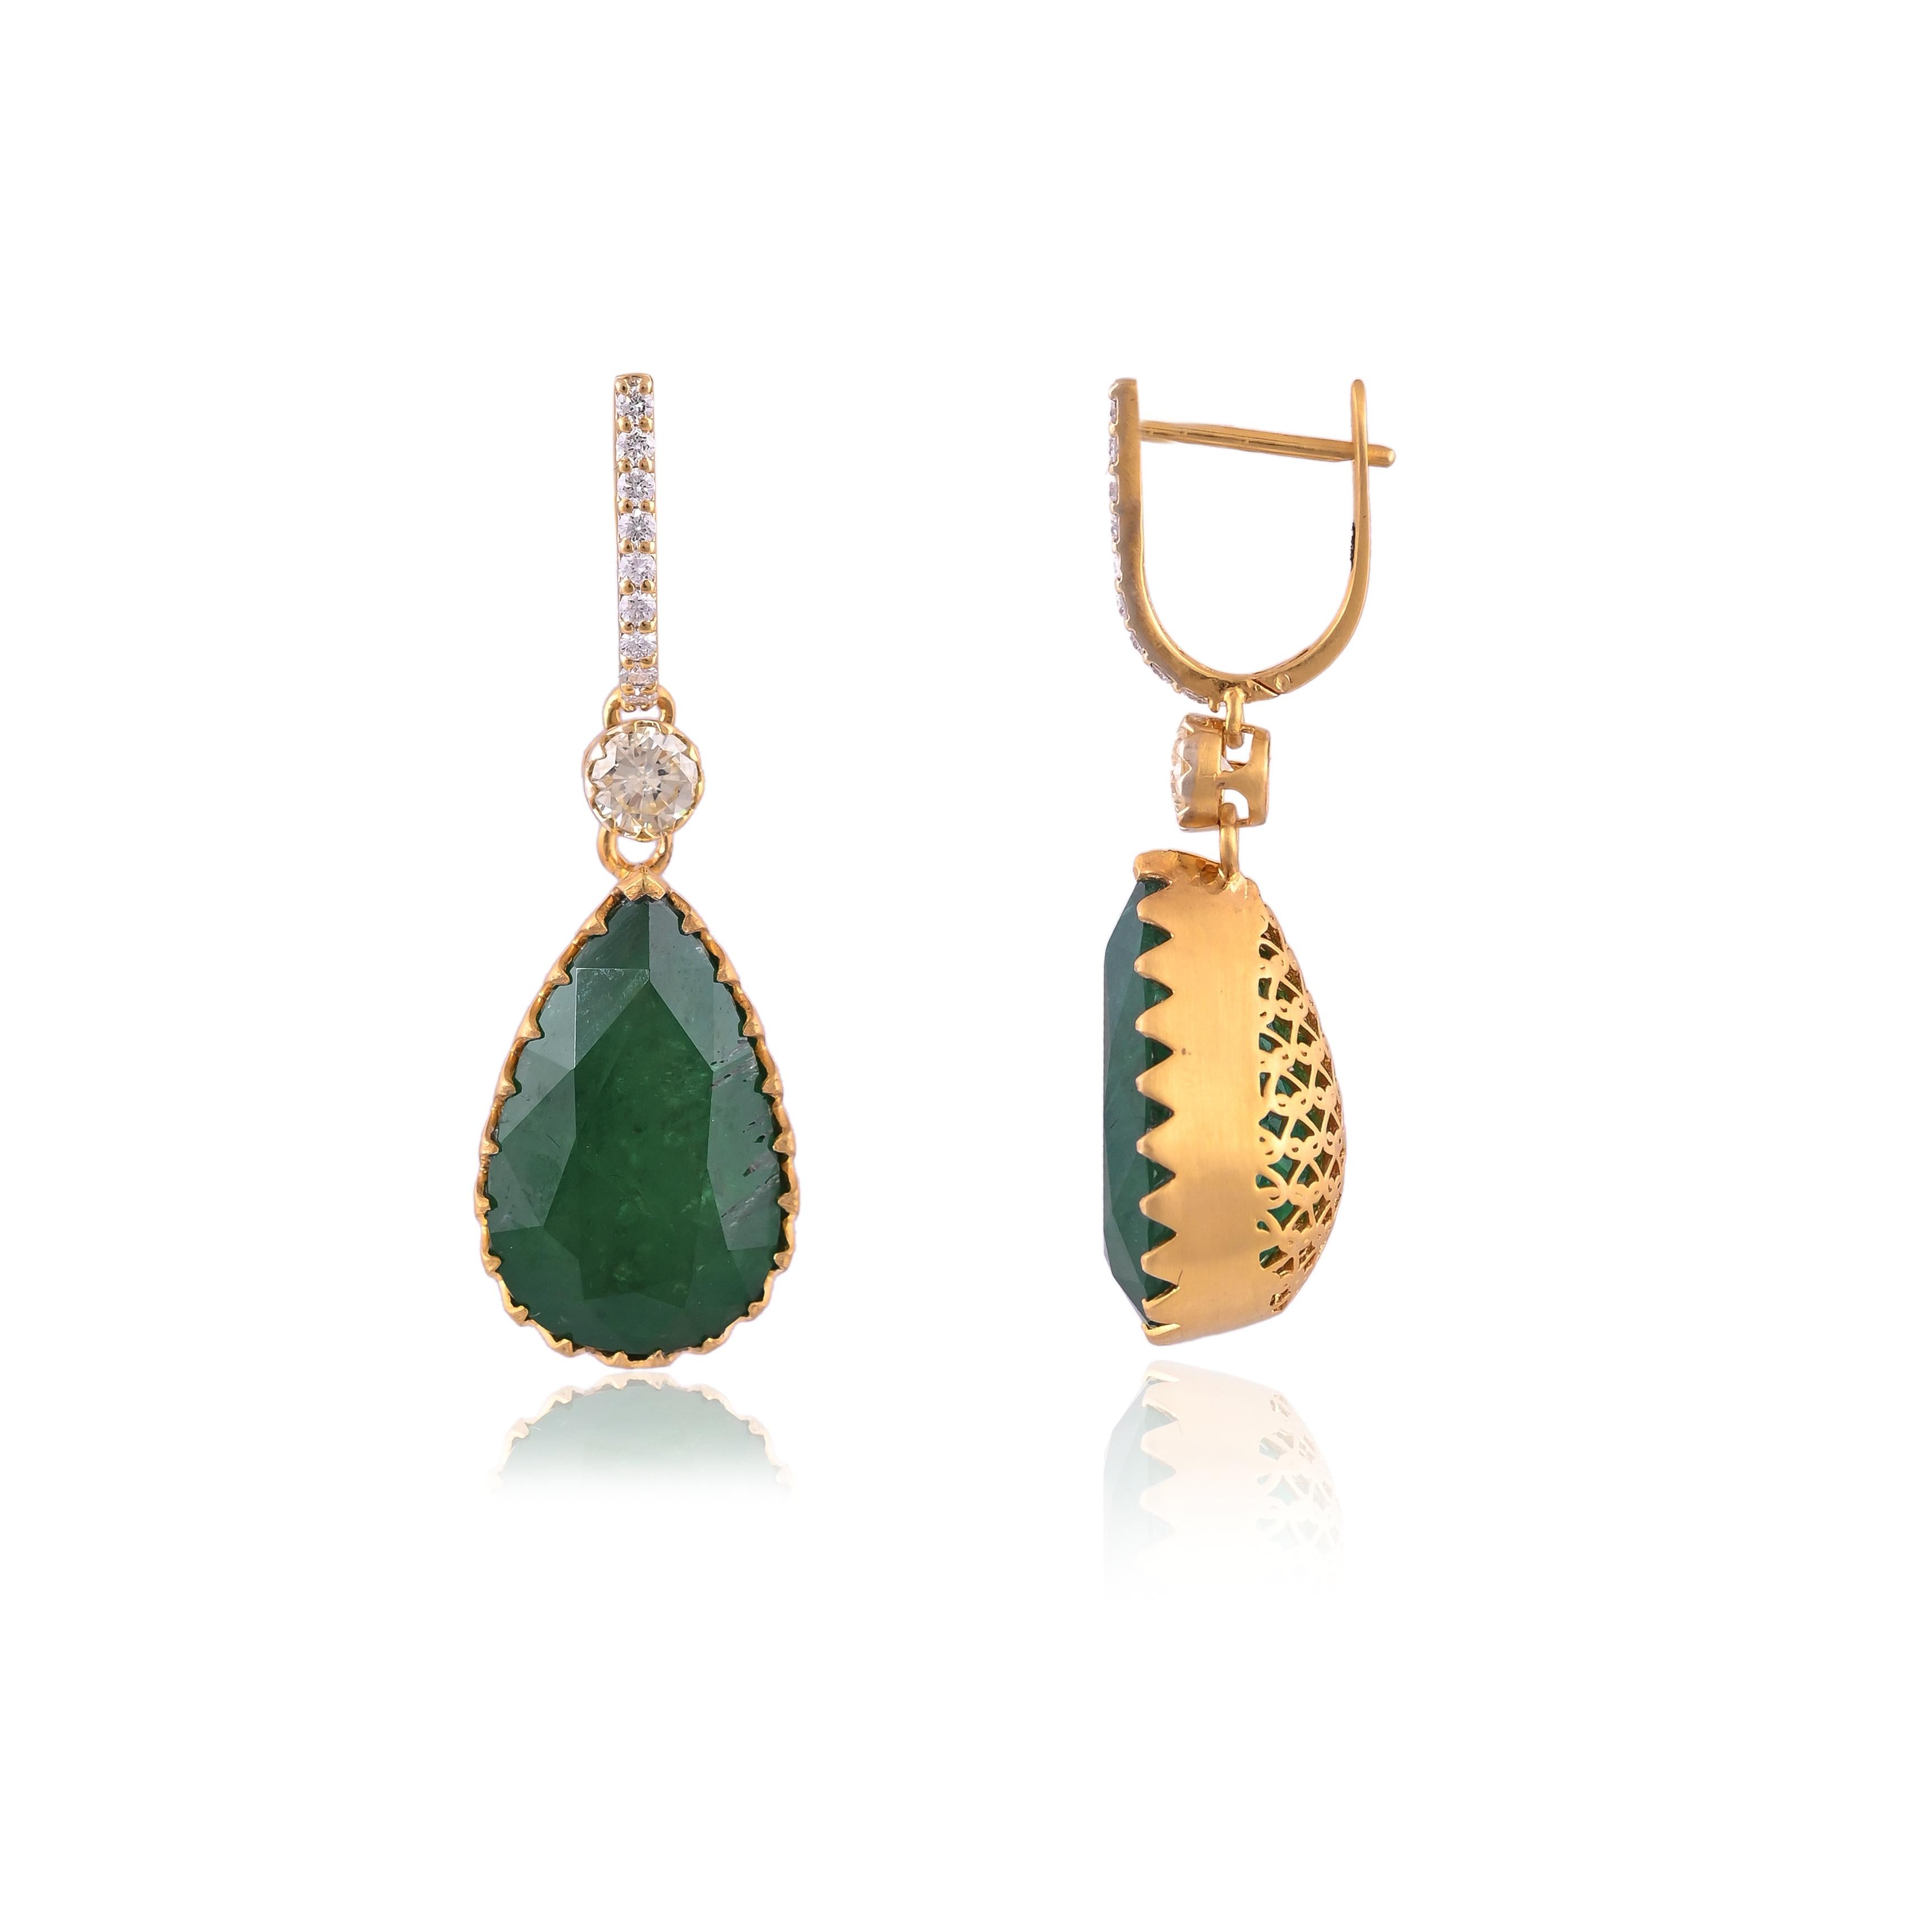 A very beautiful Emerald Chandelier/ Dangle Earrings set in 18K Gold & Diamonds. The Emeralds are of Zambian origin and weighs 27.04 carats. The Emeralds are completely natural without any treatment. The weight of the Diamonds is 1.13 carats. The